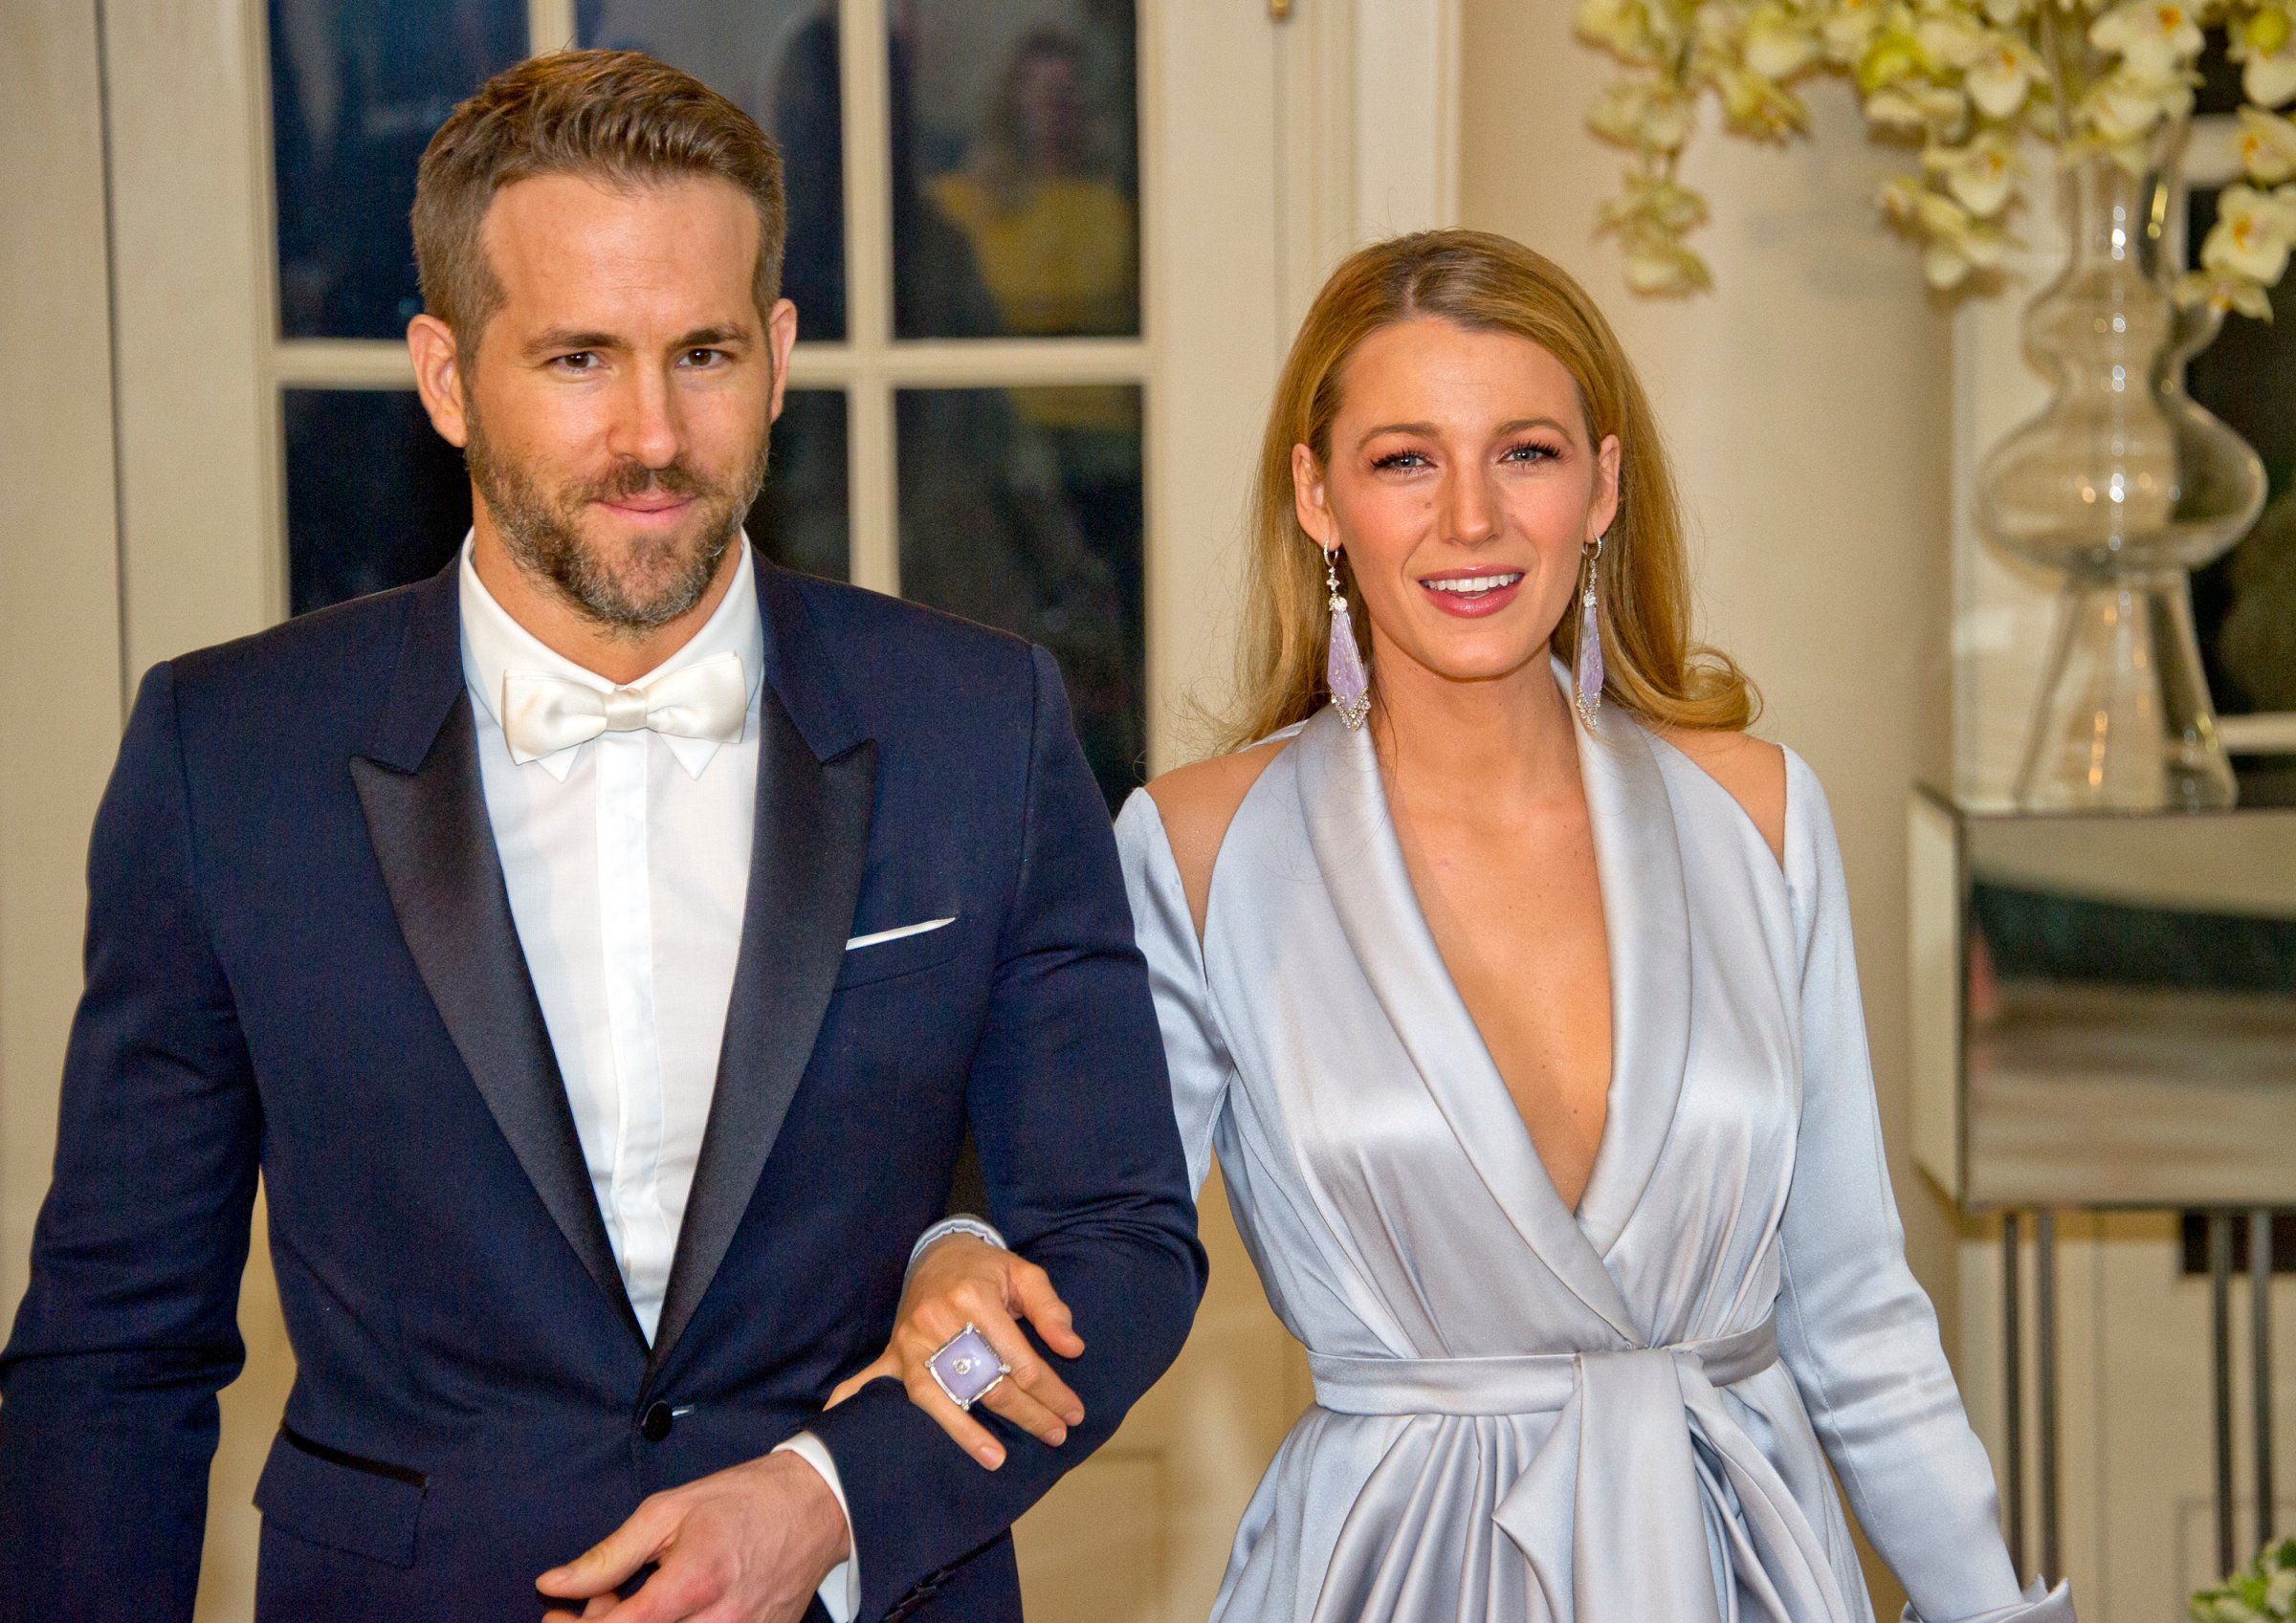 Blake Lively and Ryan Reynolds arrive for the State Dinner in honor of Prime Minister Trudeau and Mrs. Sophie Grégoire Trudeau of Canada at the White House in Washington, DC on Thursday, March 10, 2016.